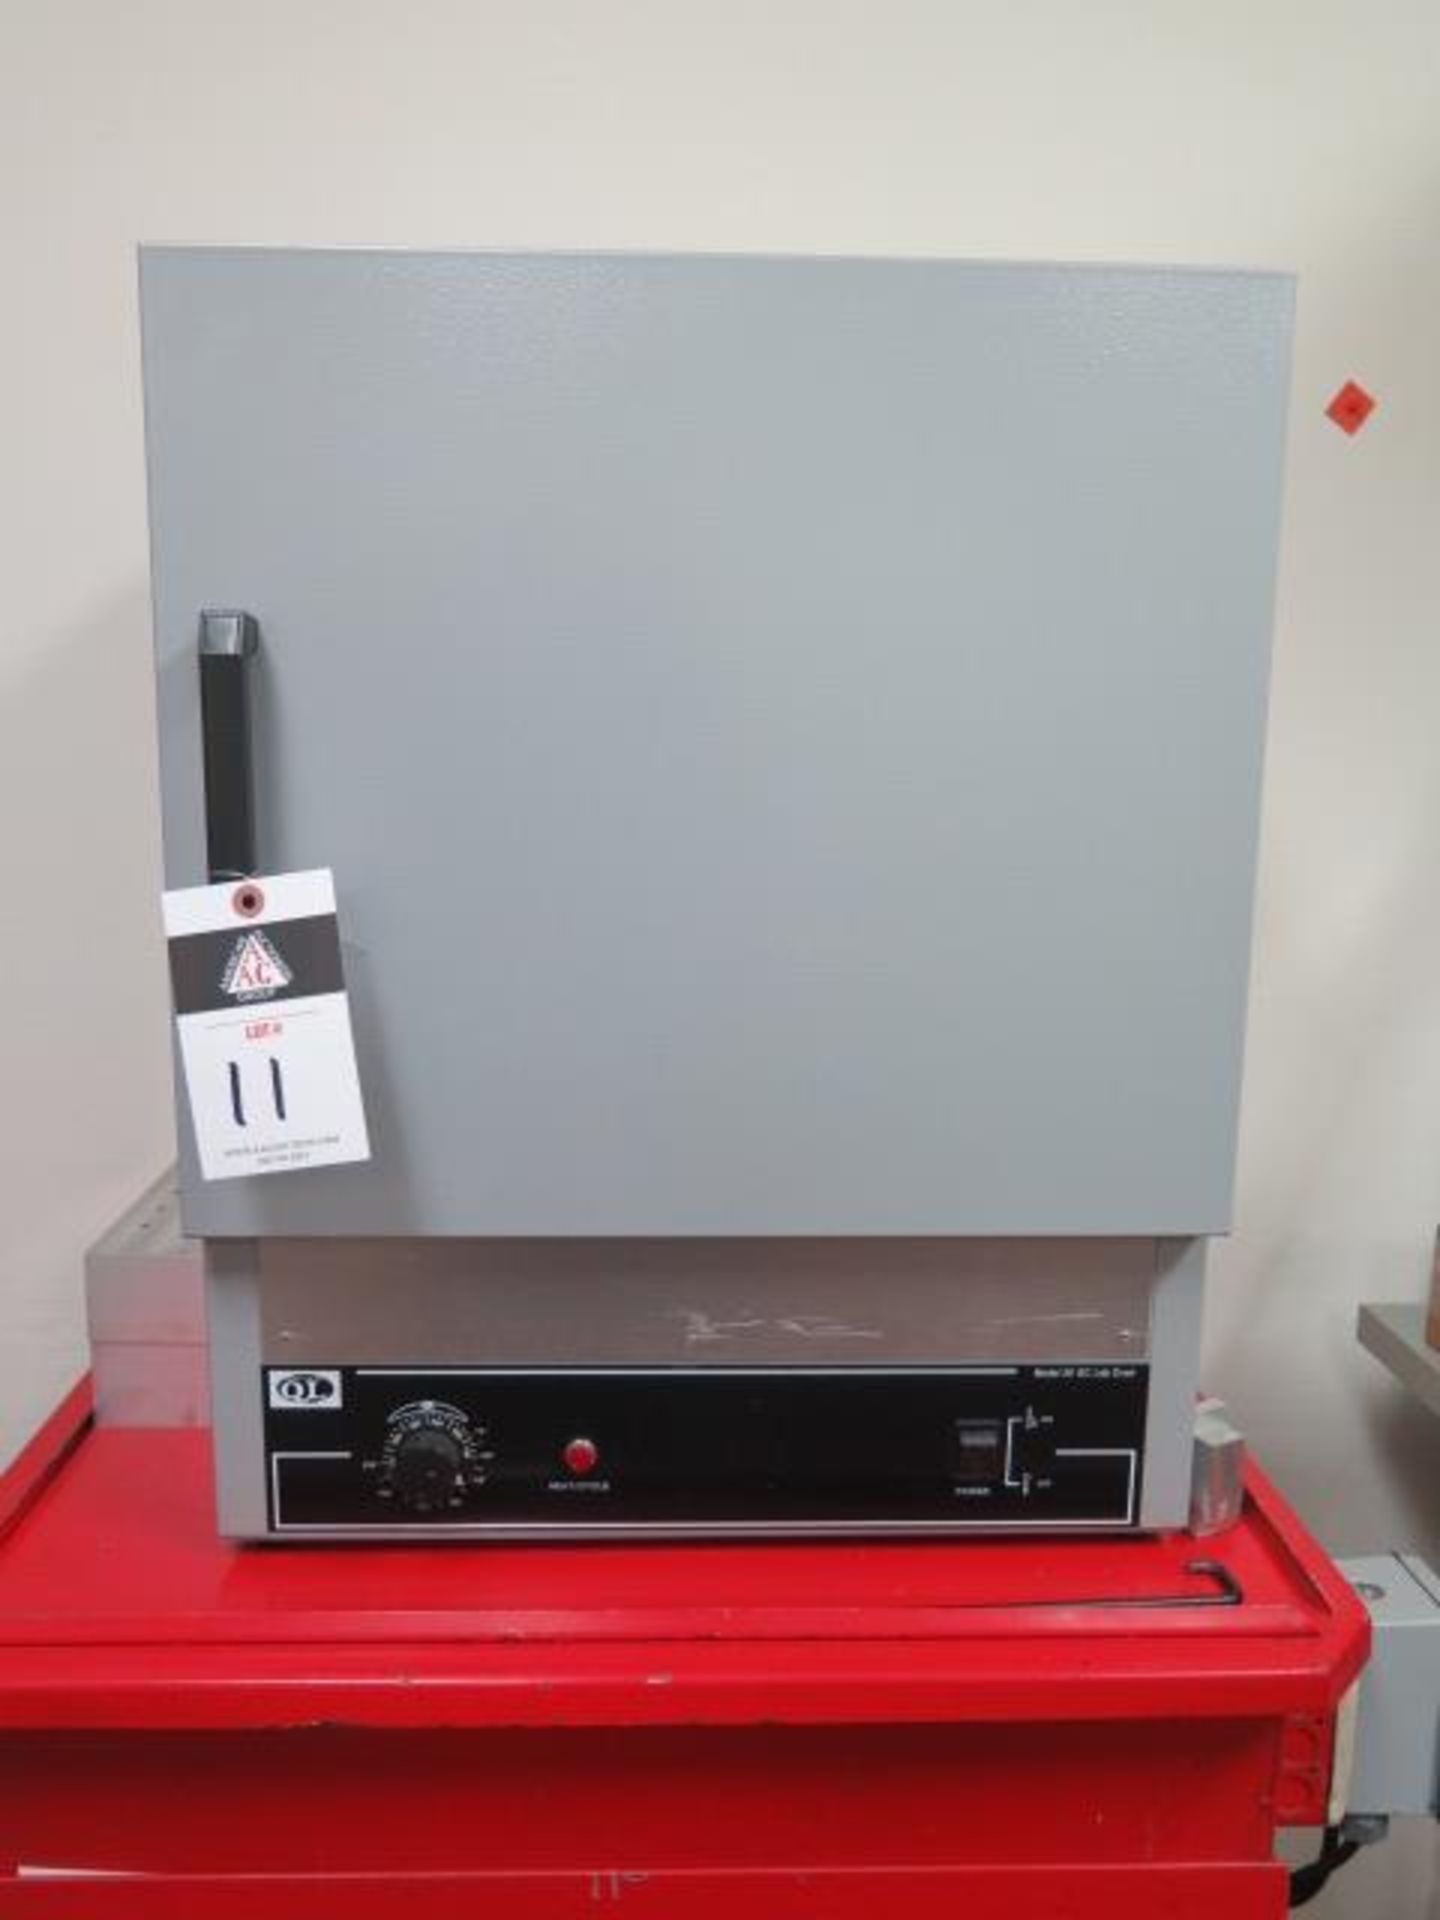 QL mdl. 30GC Lab Oven (SOLD AS-IS - NO WARRANTY)